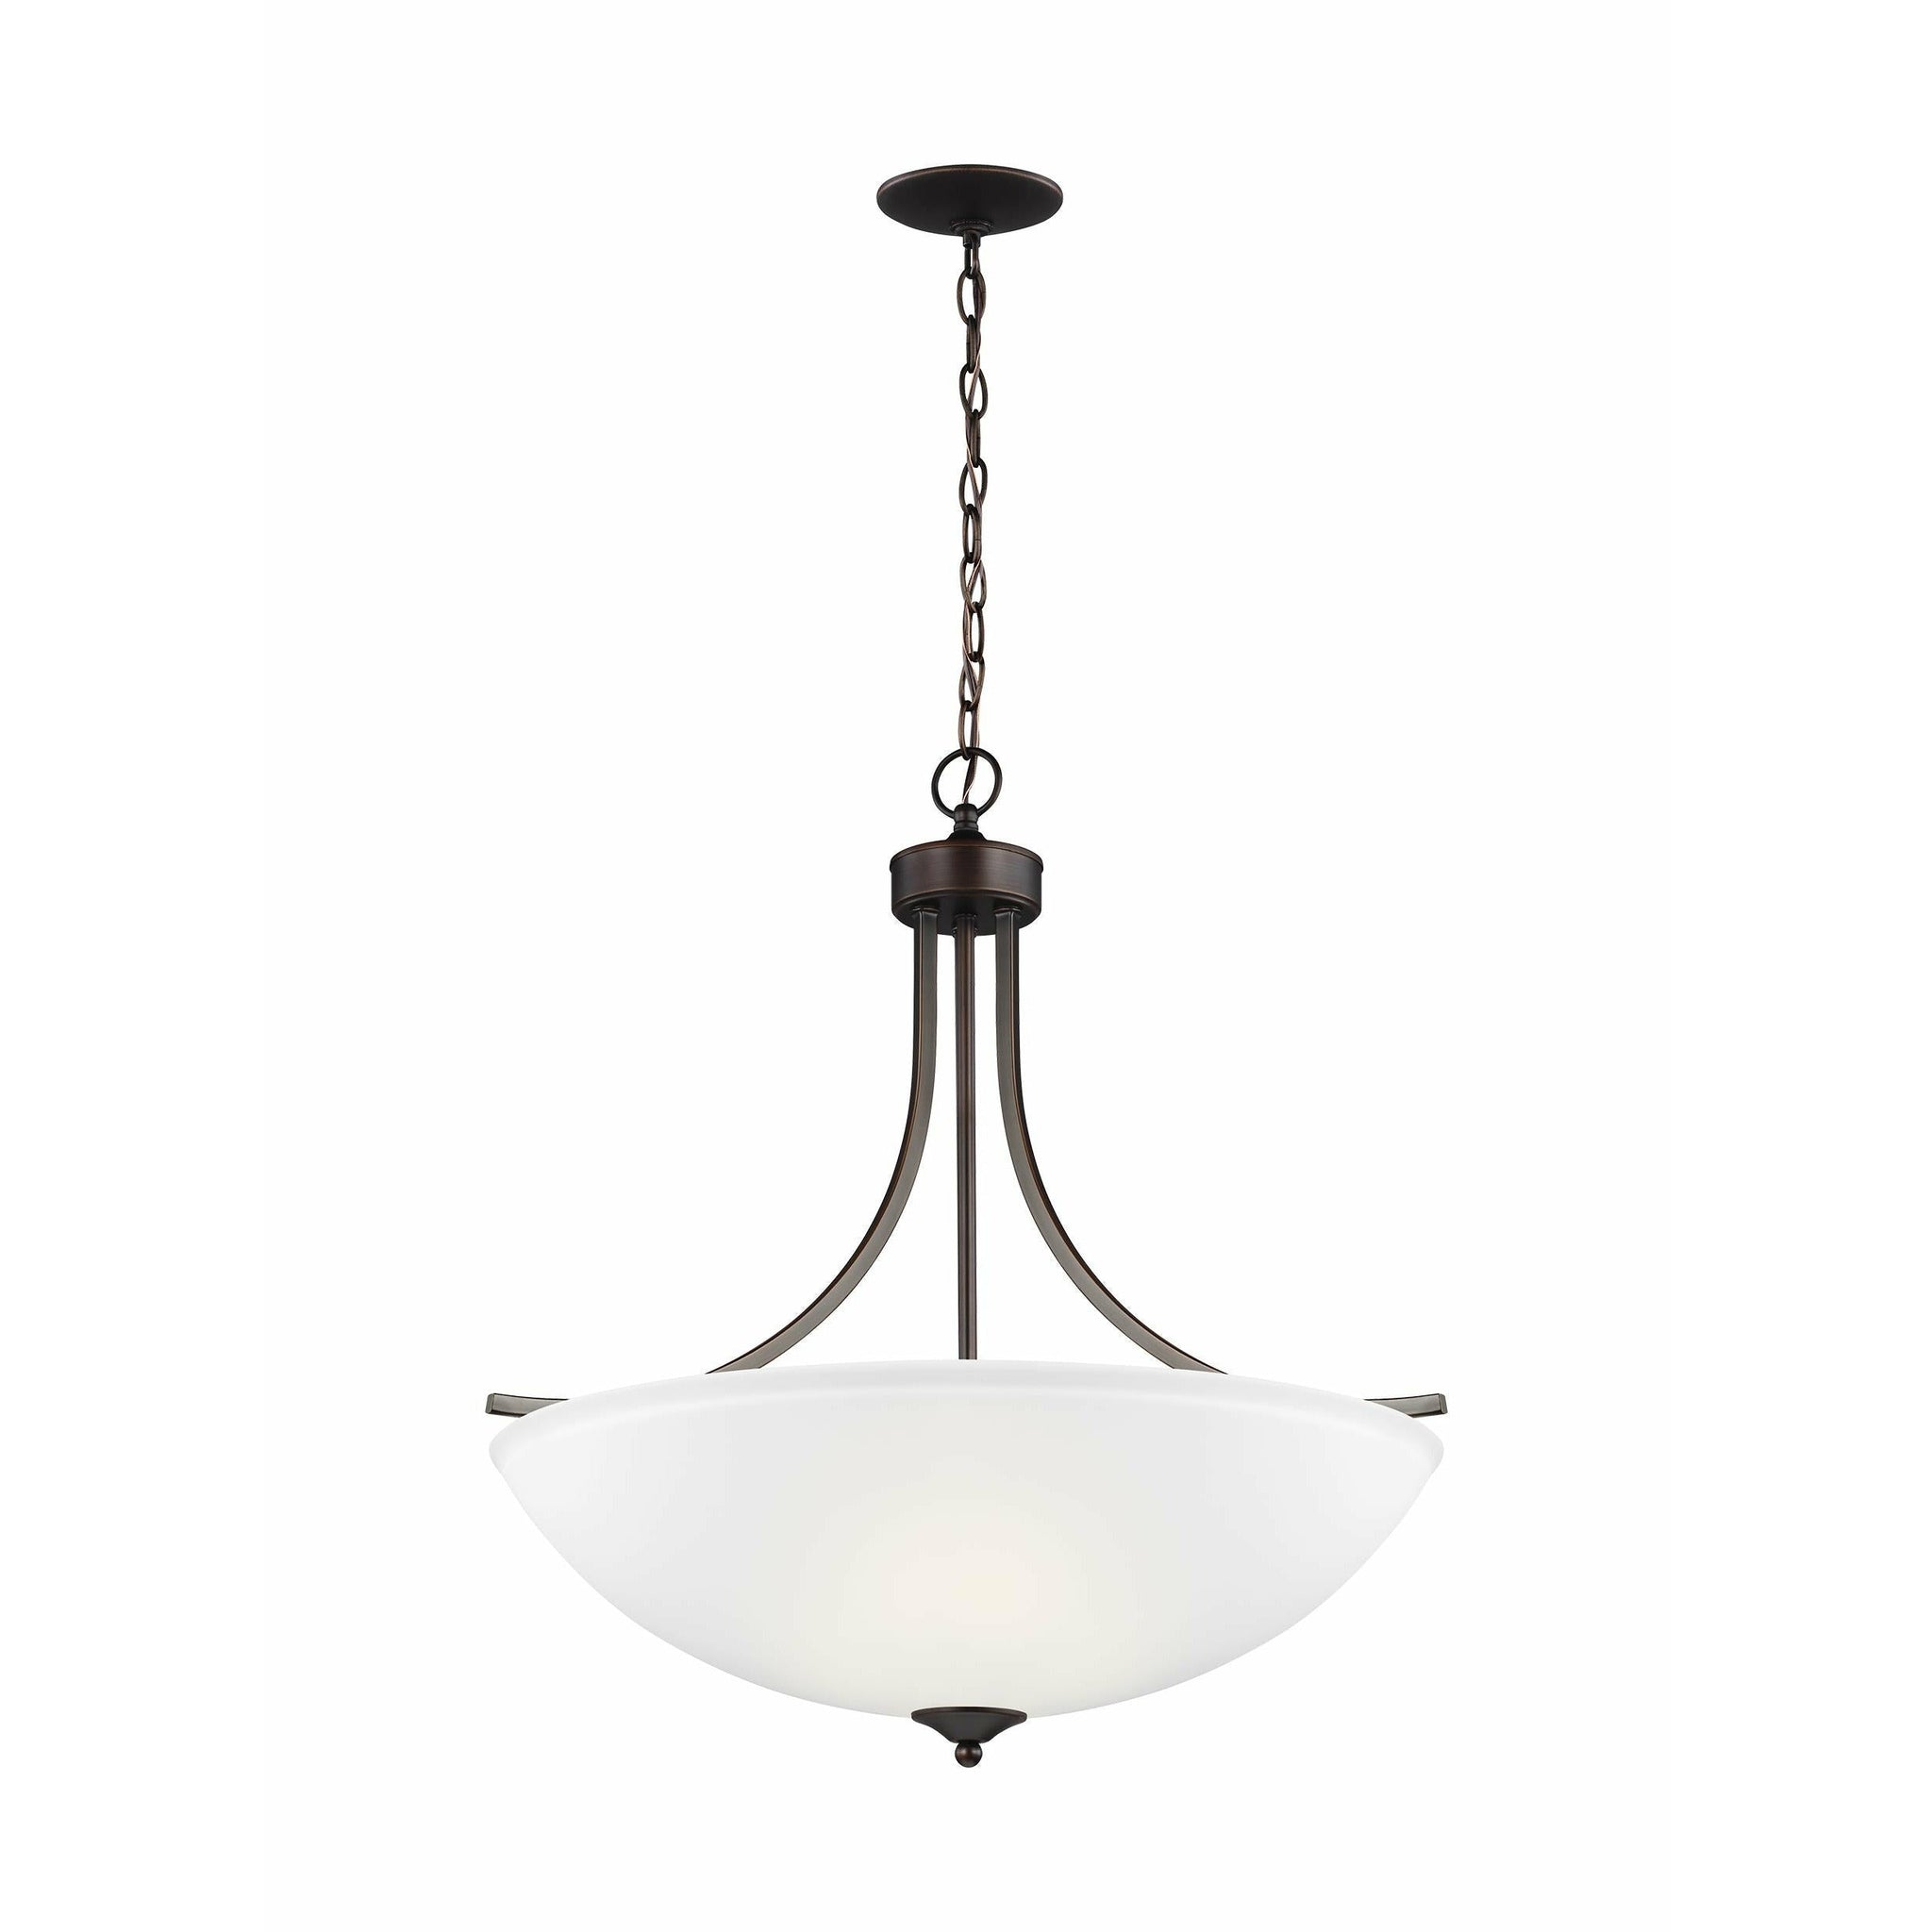 Geary Large 4-Light Pendant